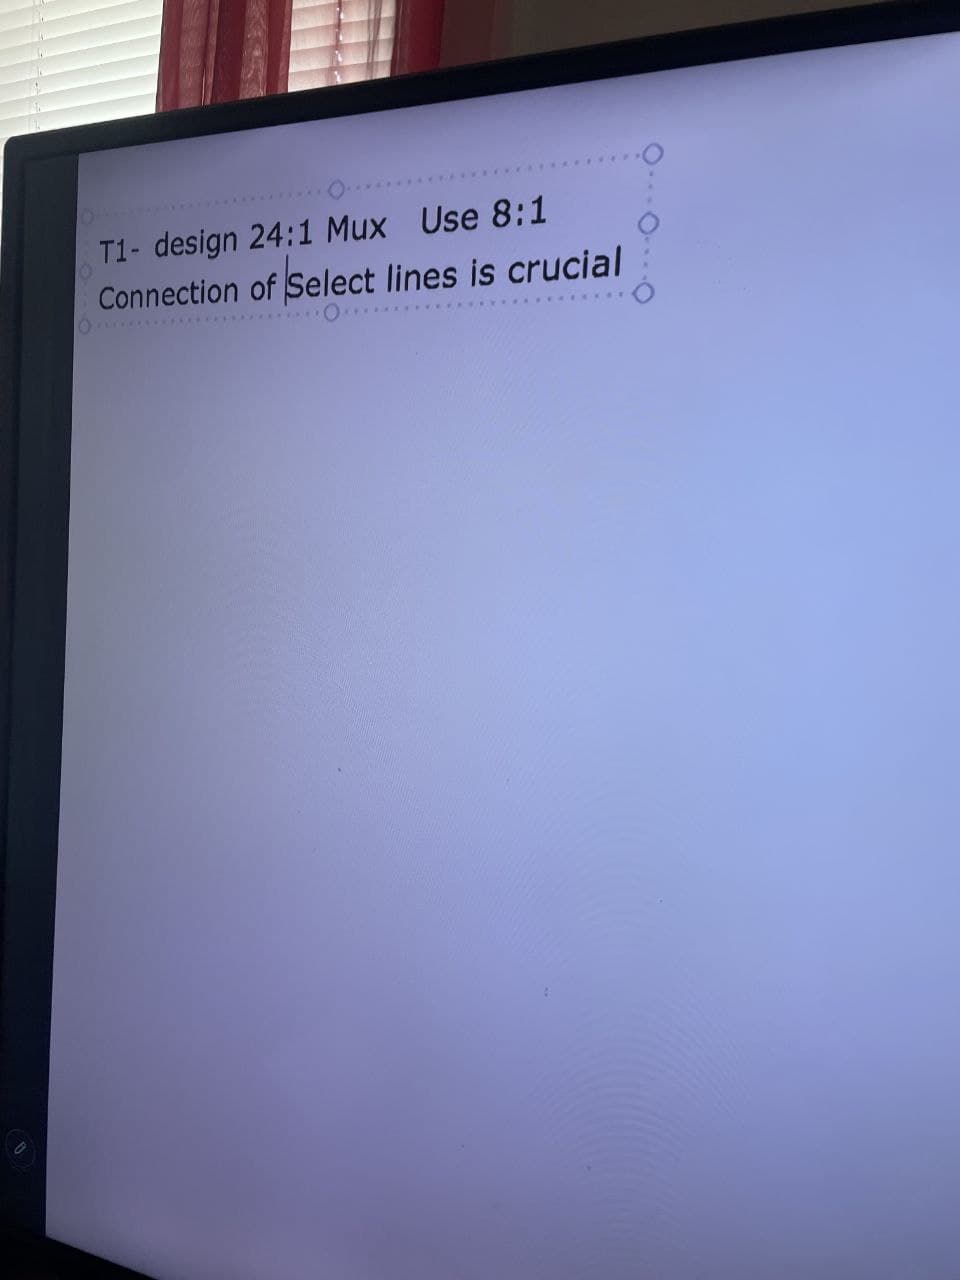 T1- design 24:1 Mux Use 8:1
Connection of Select lines is crucial